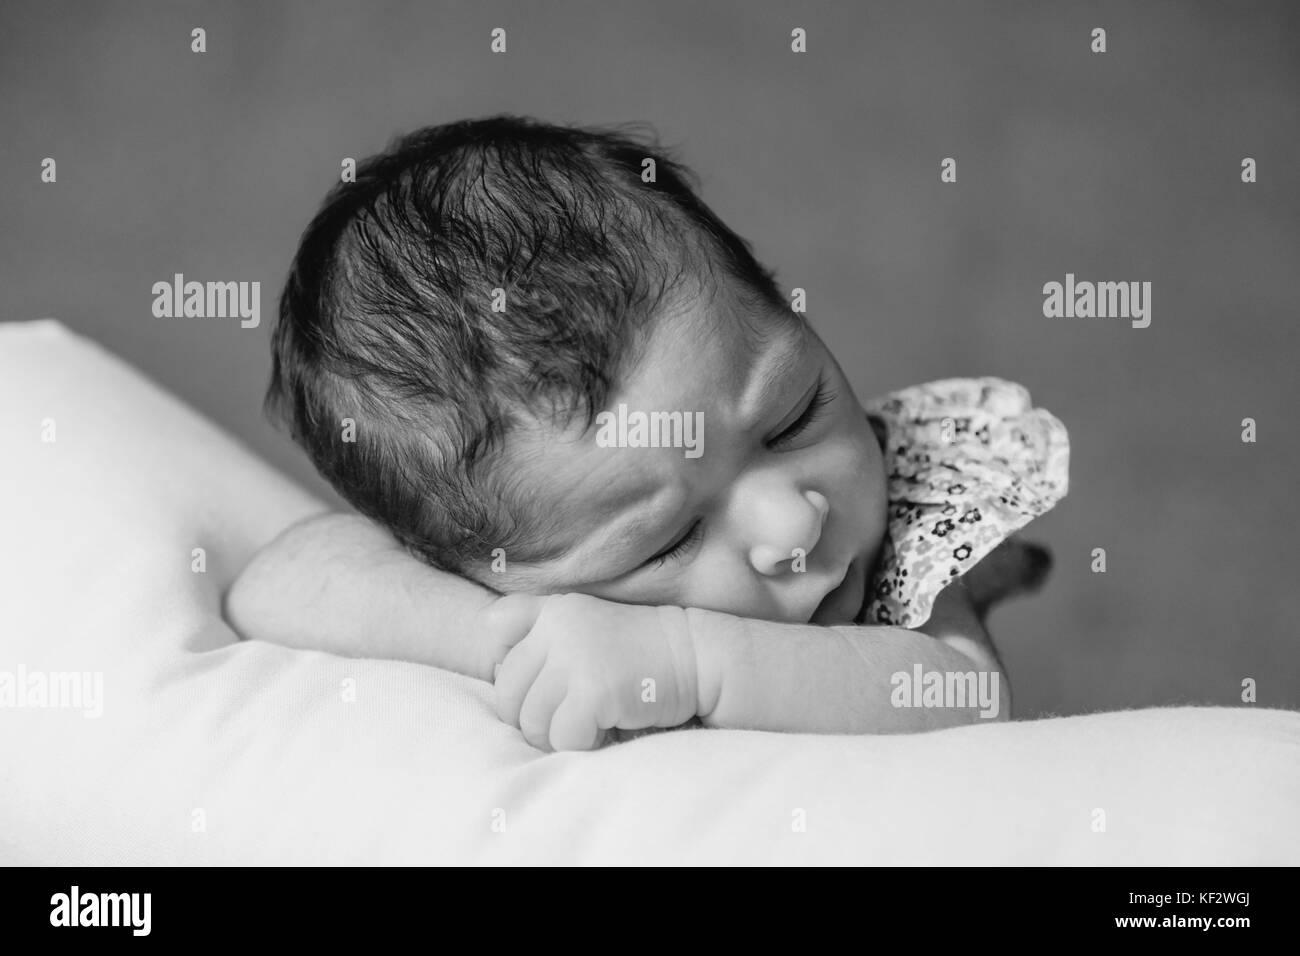 Close up portrait of a cute two weeks old newborn baby girl wearing a floral dress, sleeping peacefully over a pillow / newborn baby portrait cute Stock Photo